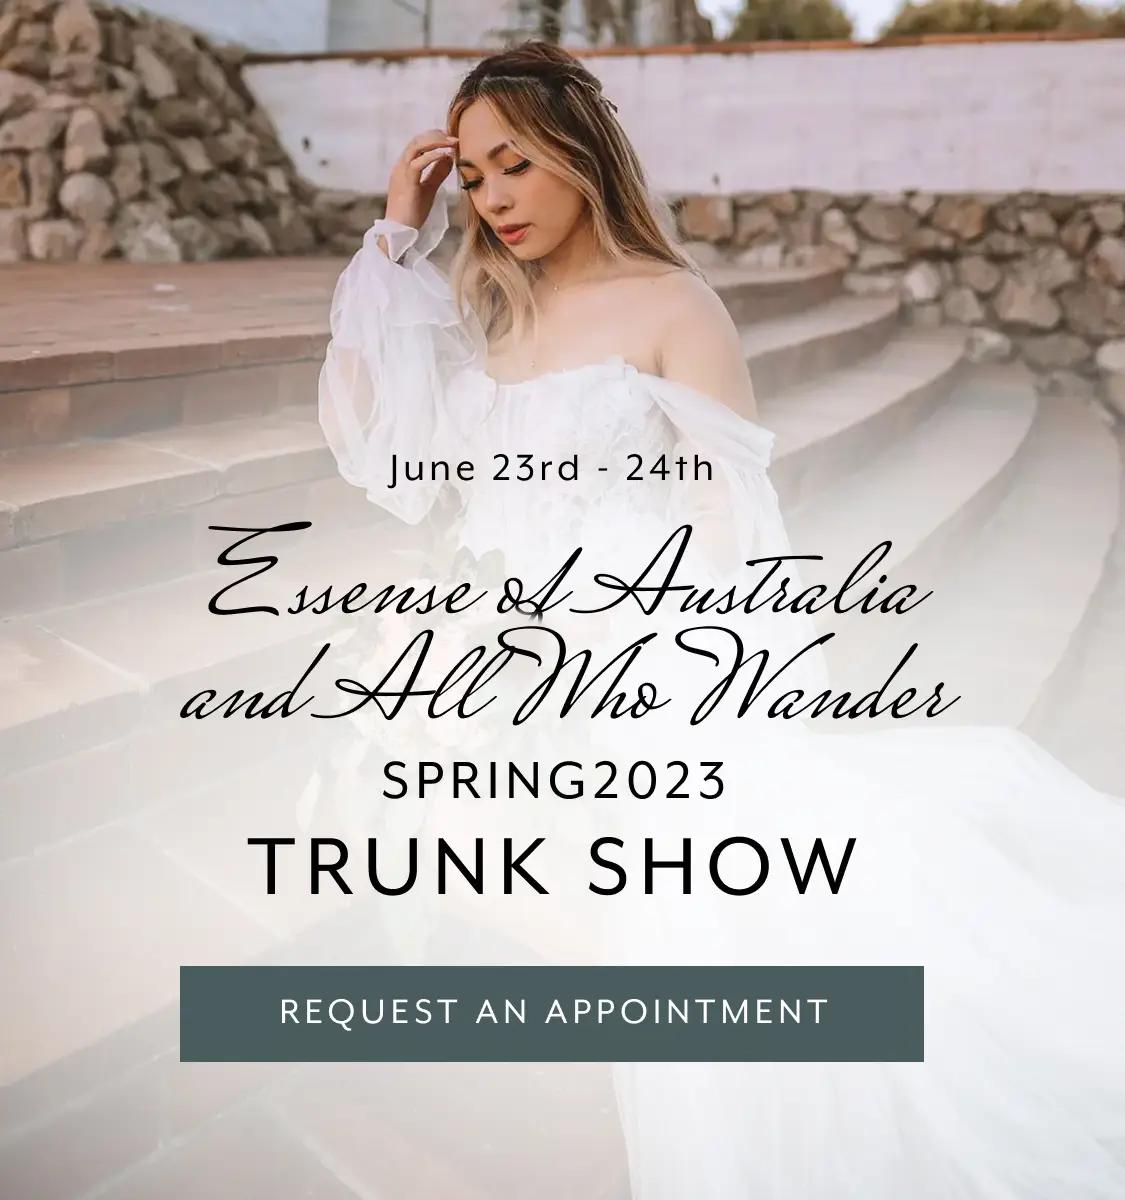 Essense of Australia and All Who Wander Spring 2023 Trunk Show Banner Mobile